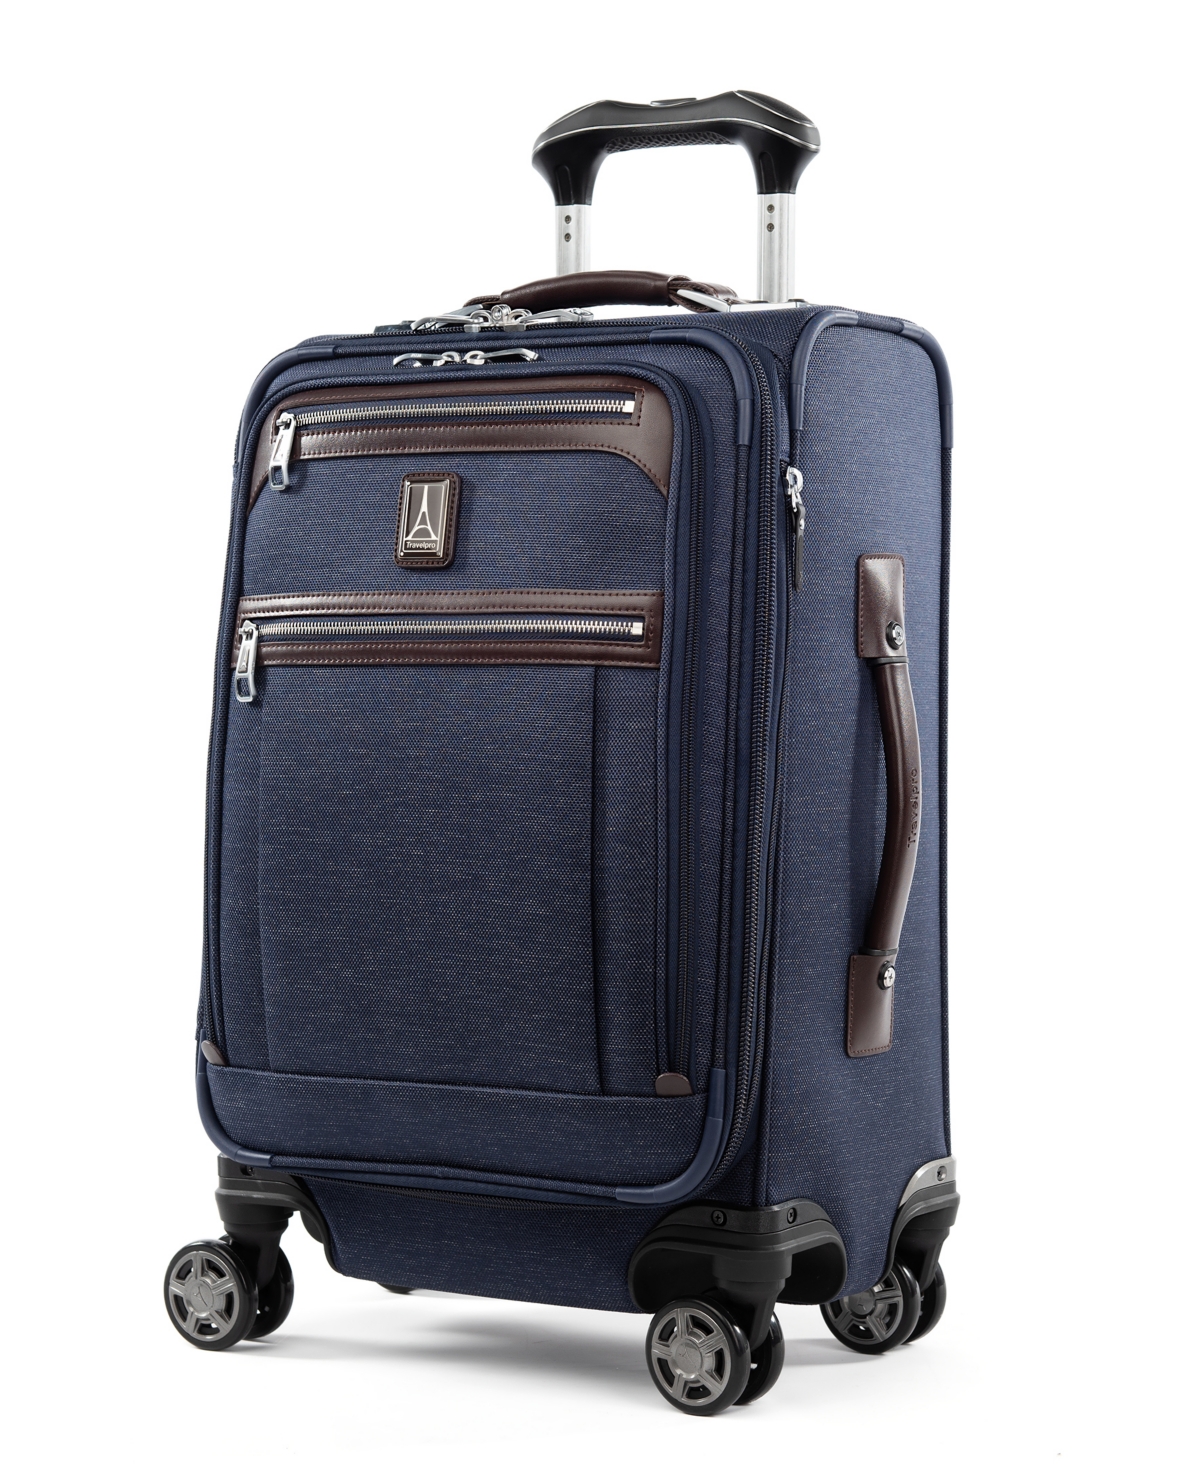 Platinum Elite Limited Edition 20" Business Plus Softside Carry-On Luggage - Limited Edition True Navy